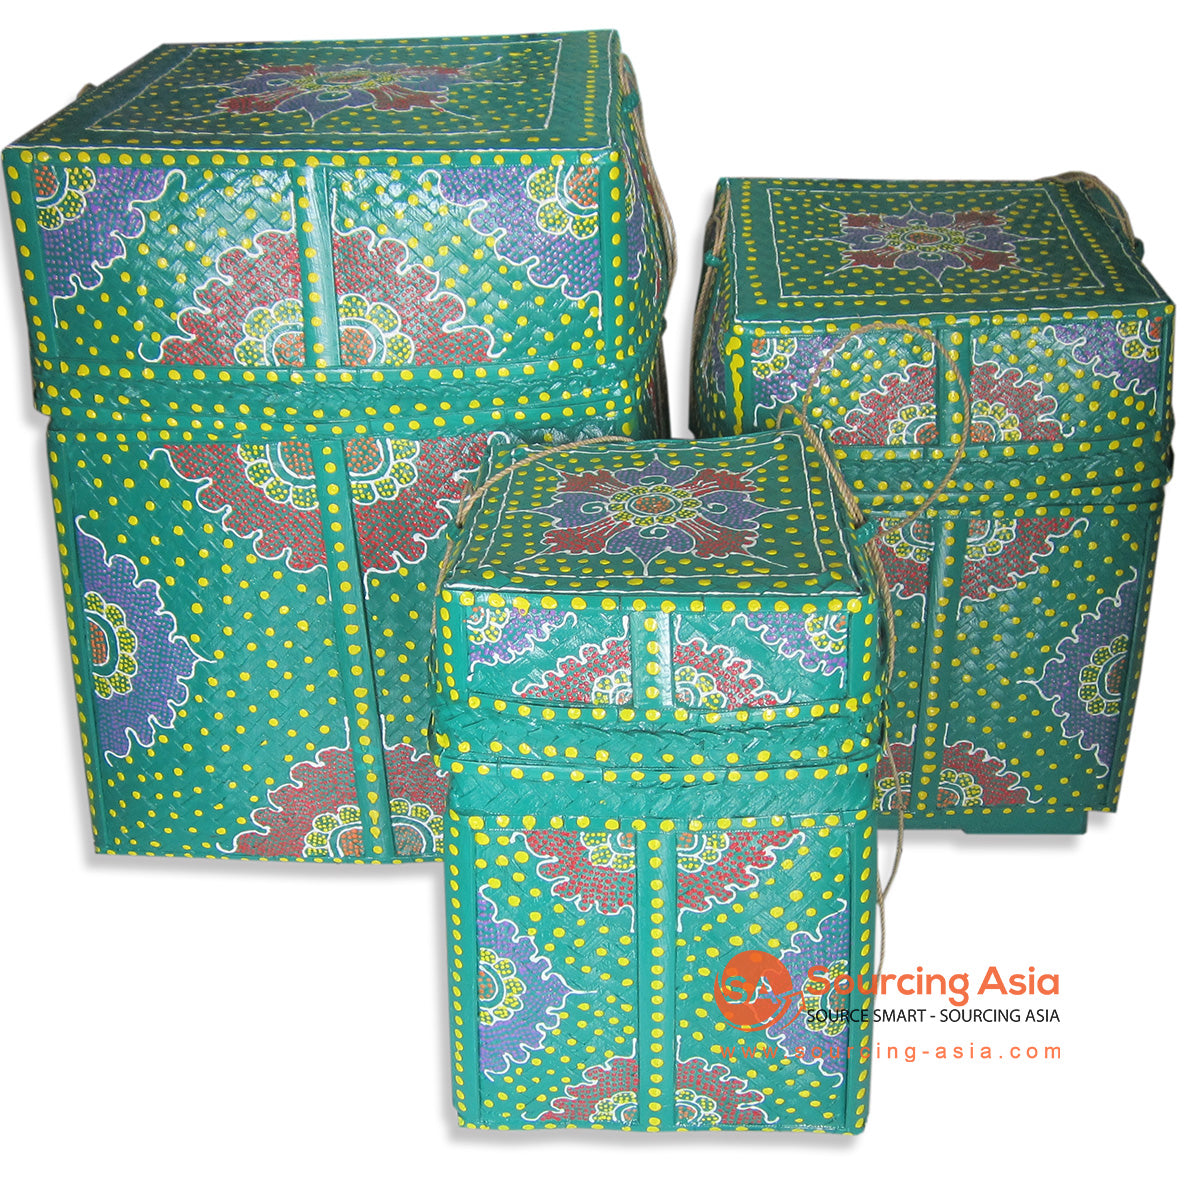 TUT014SET-GR SET OF THREE GREEN PAINTED CEREMONY BOXES